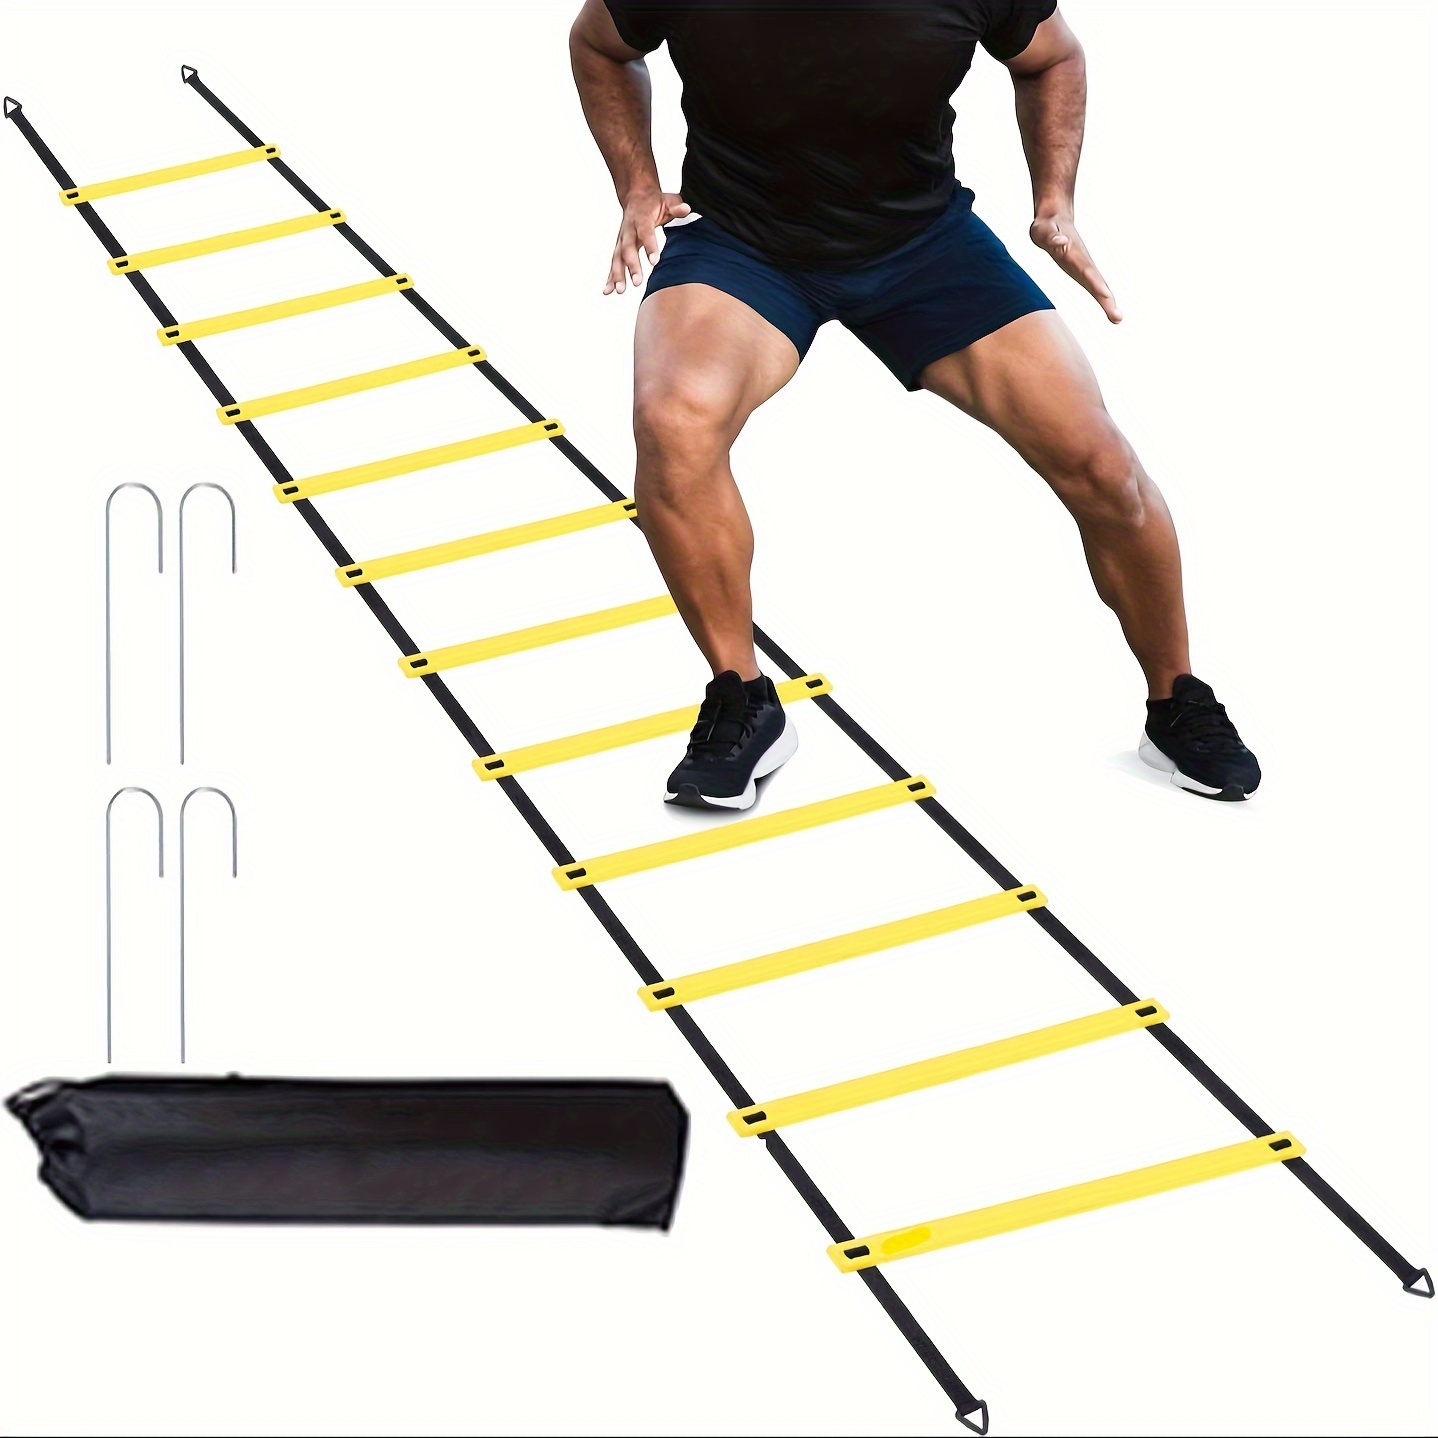 Juvale Agility Ladder Workout Equipment with 6 Speed Training Cones and  Resistance Parachute, Footwork Skills Drill Gear for Football and Soccer  (20